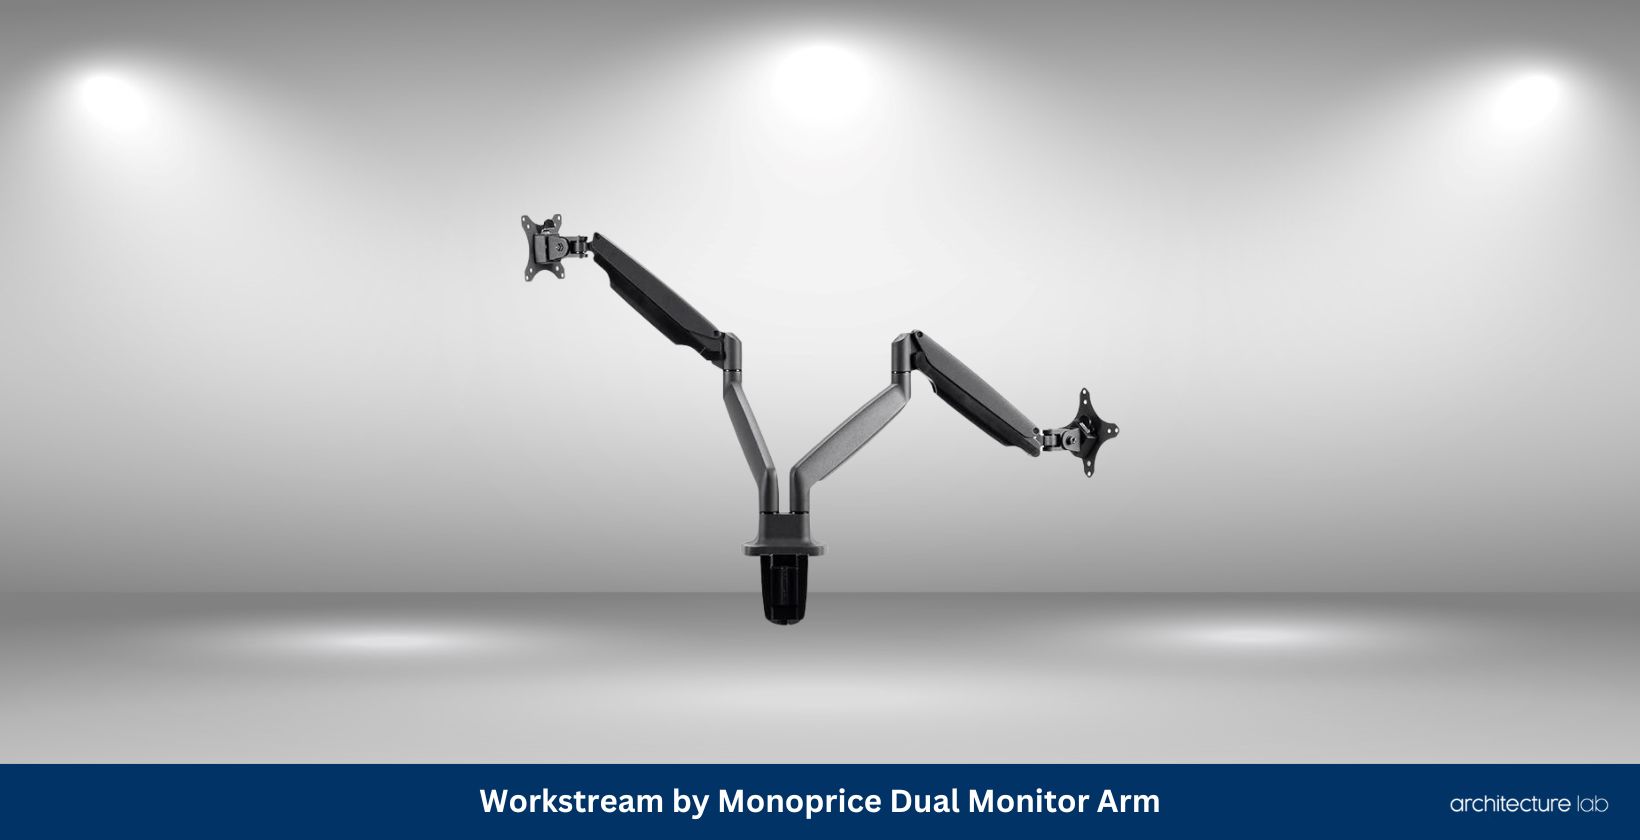 Workstream by monoprice dual monitor arm